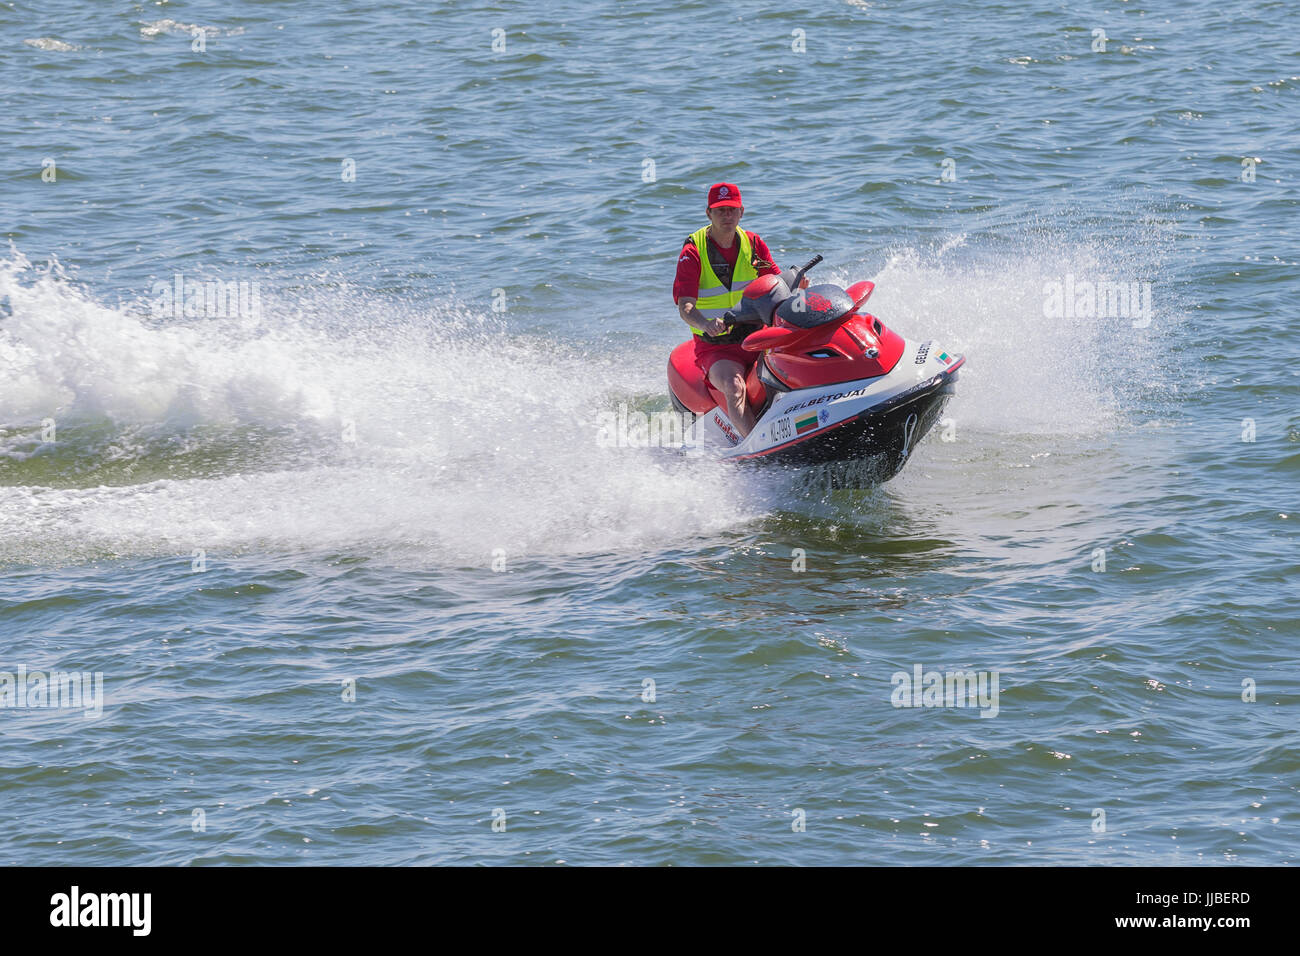 Rescuer on the water at work, Palanga, Lithuania. Stock Photo